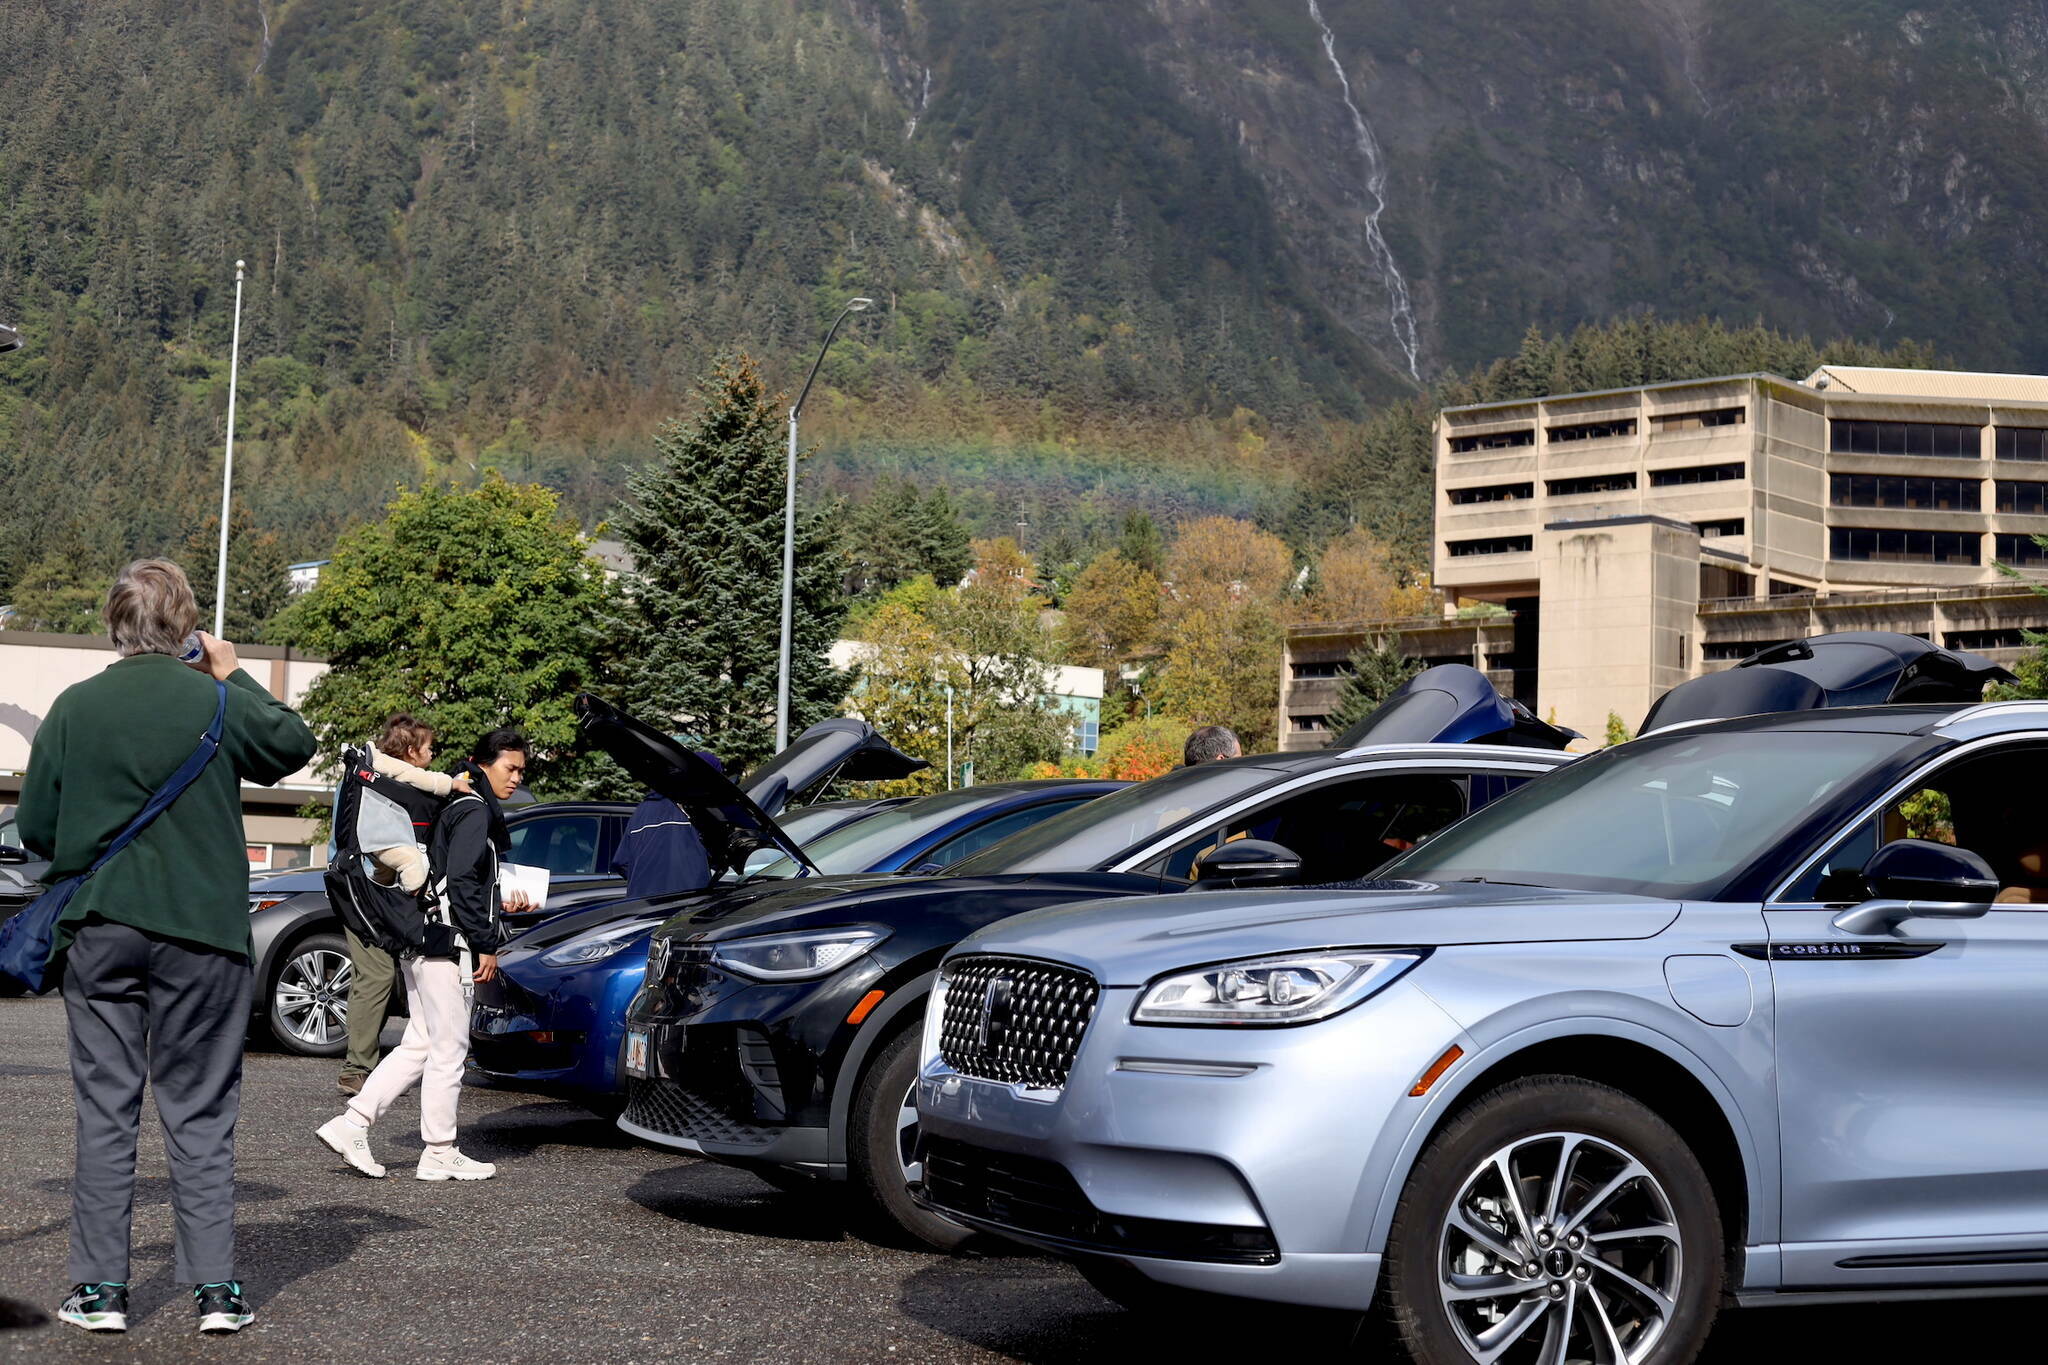 A rainbow appears over downtown as residents check out rows of electric vehicles at Juneau’s EV & E-bike Roundup on Sept. 23. (Clarise Larson / Juneau Empire File)